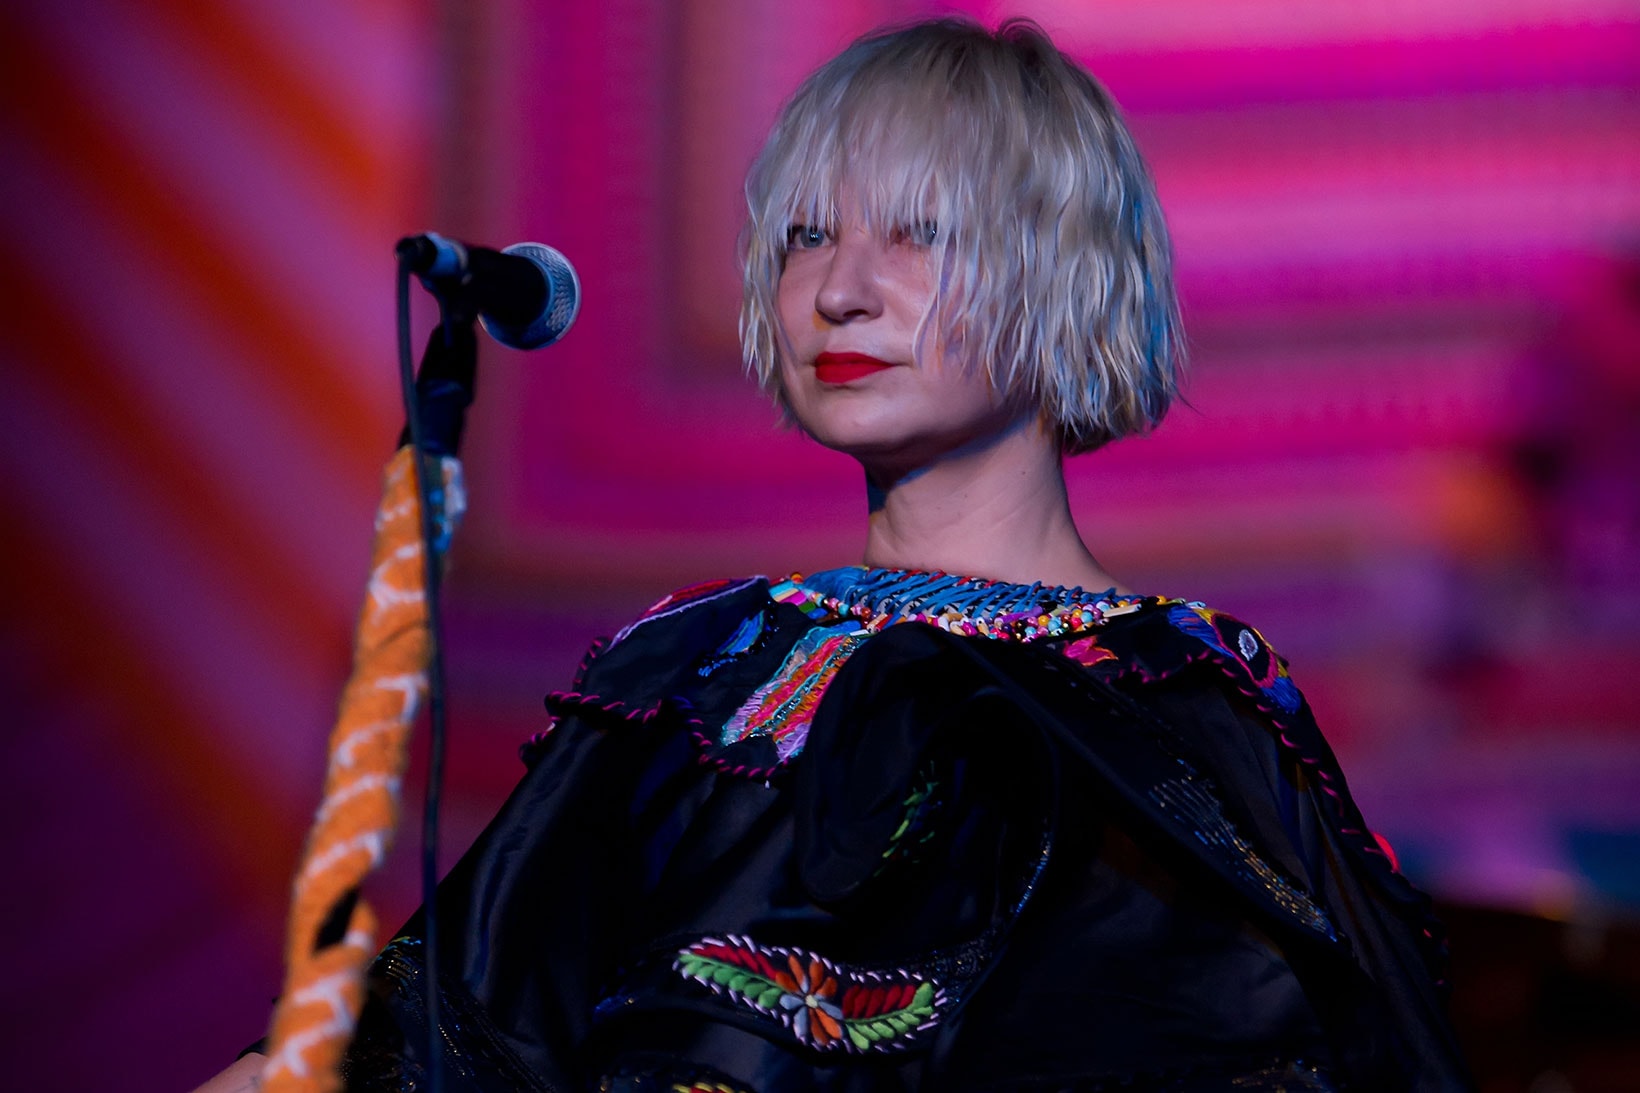 sia shia labeouf adulterous relationship singer performer musician 